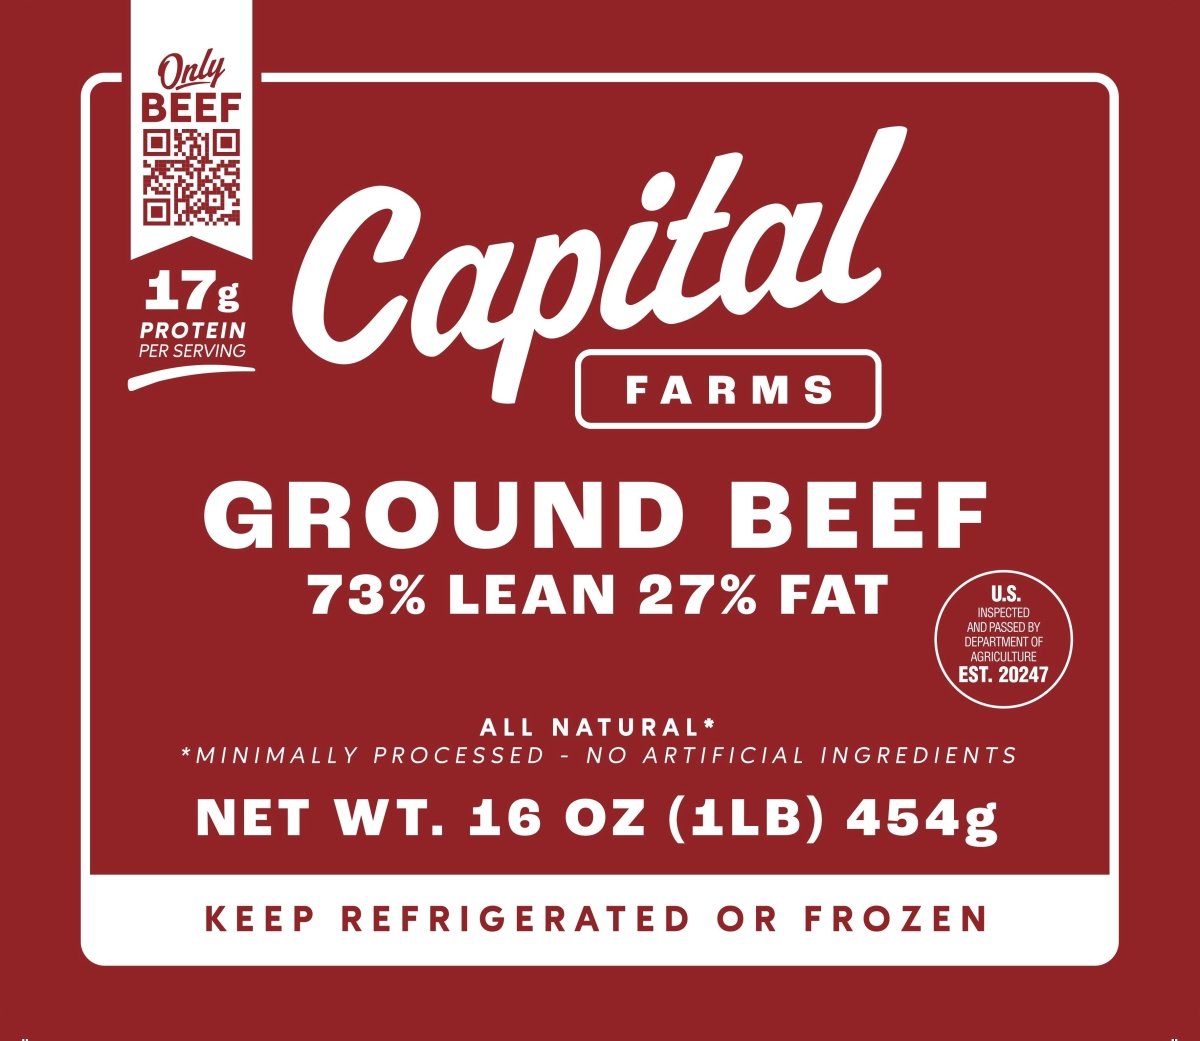 Ground Beef 73% Lean 27% Fat - 1lb - Capital Farms Meats & Provisions